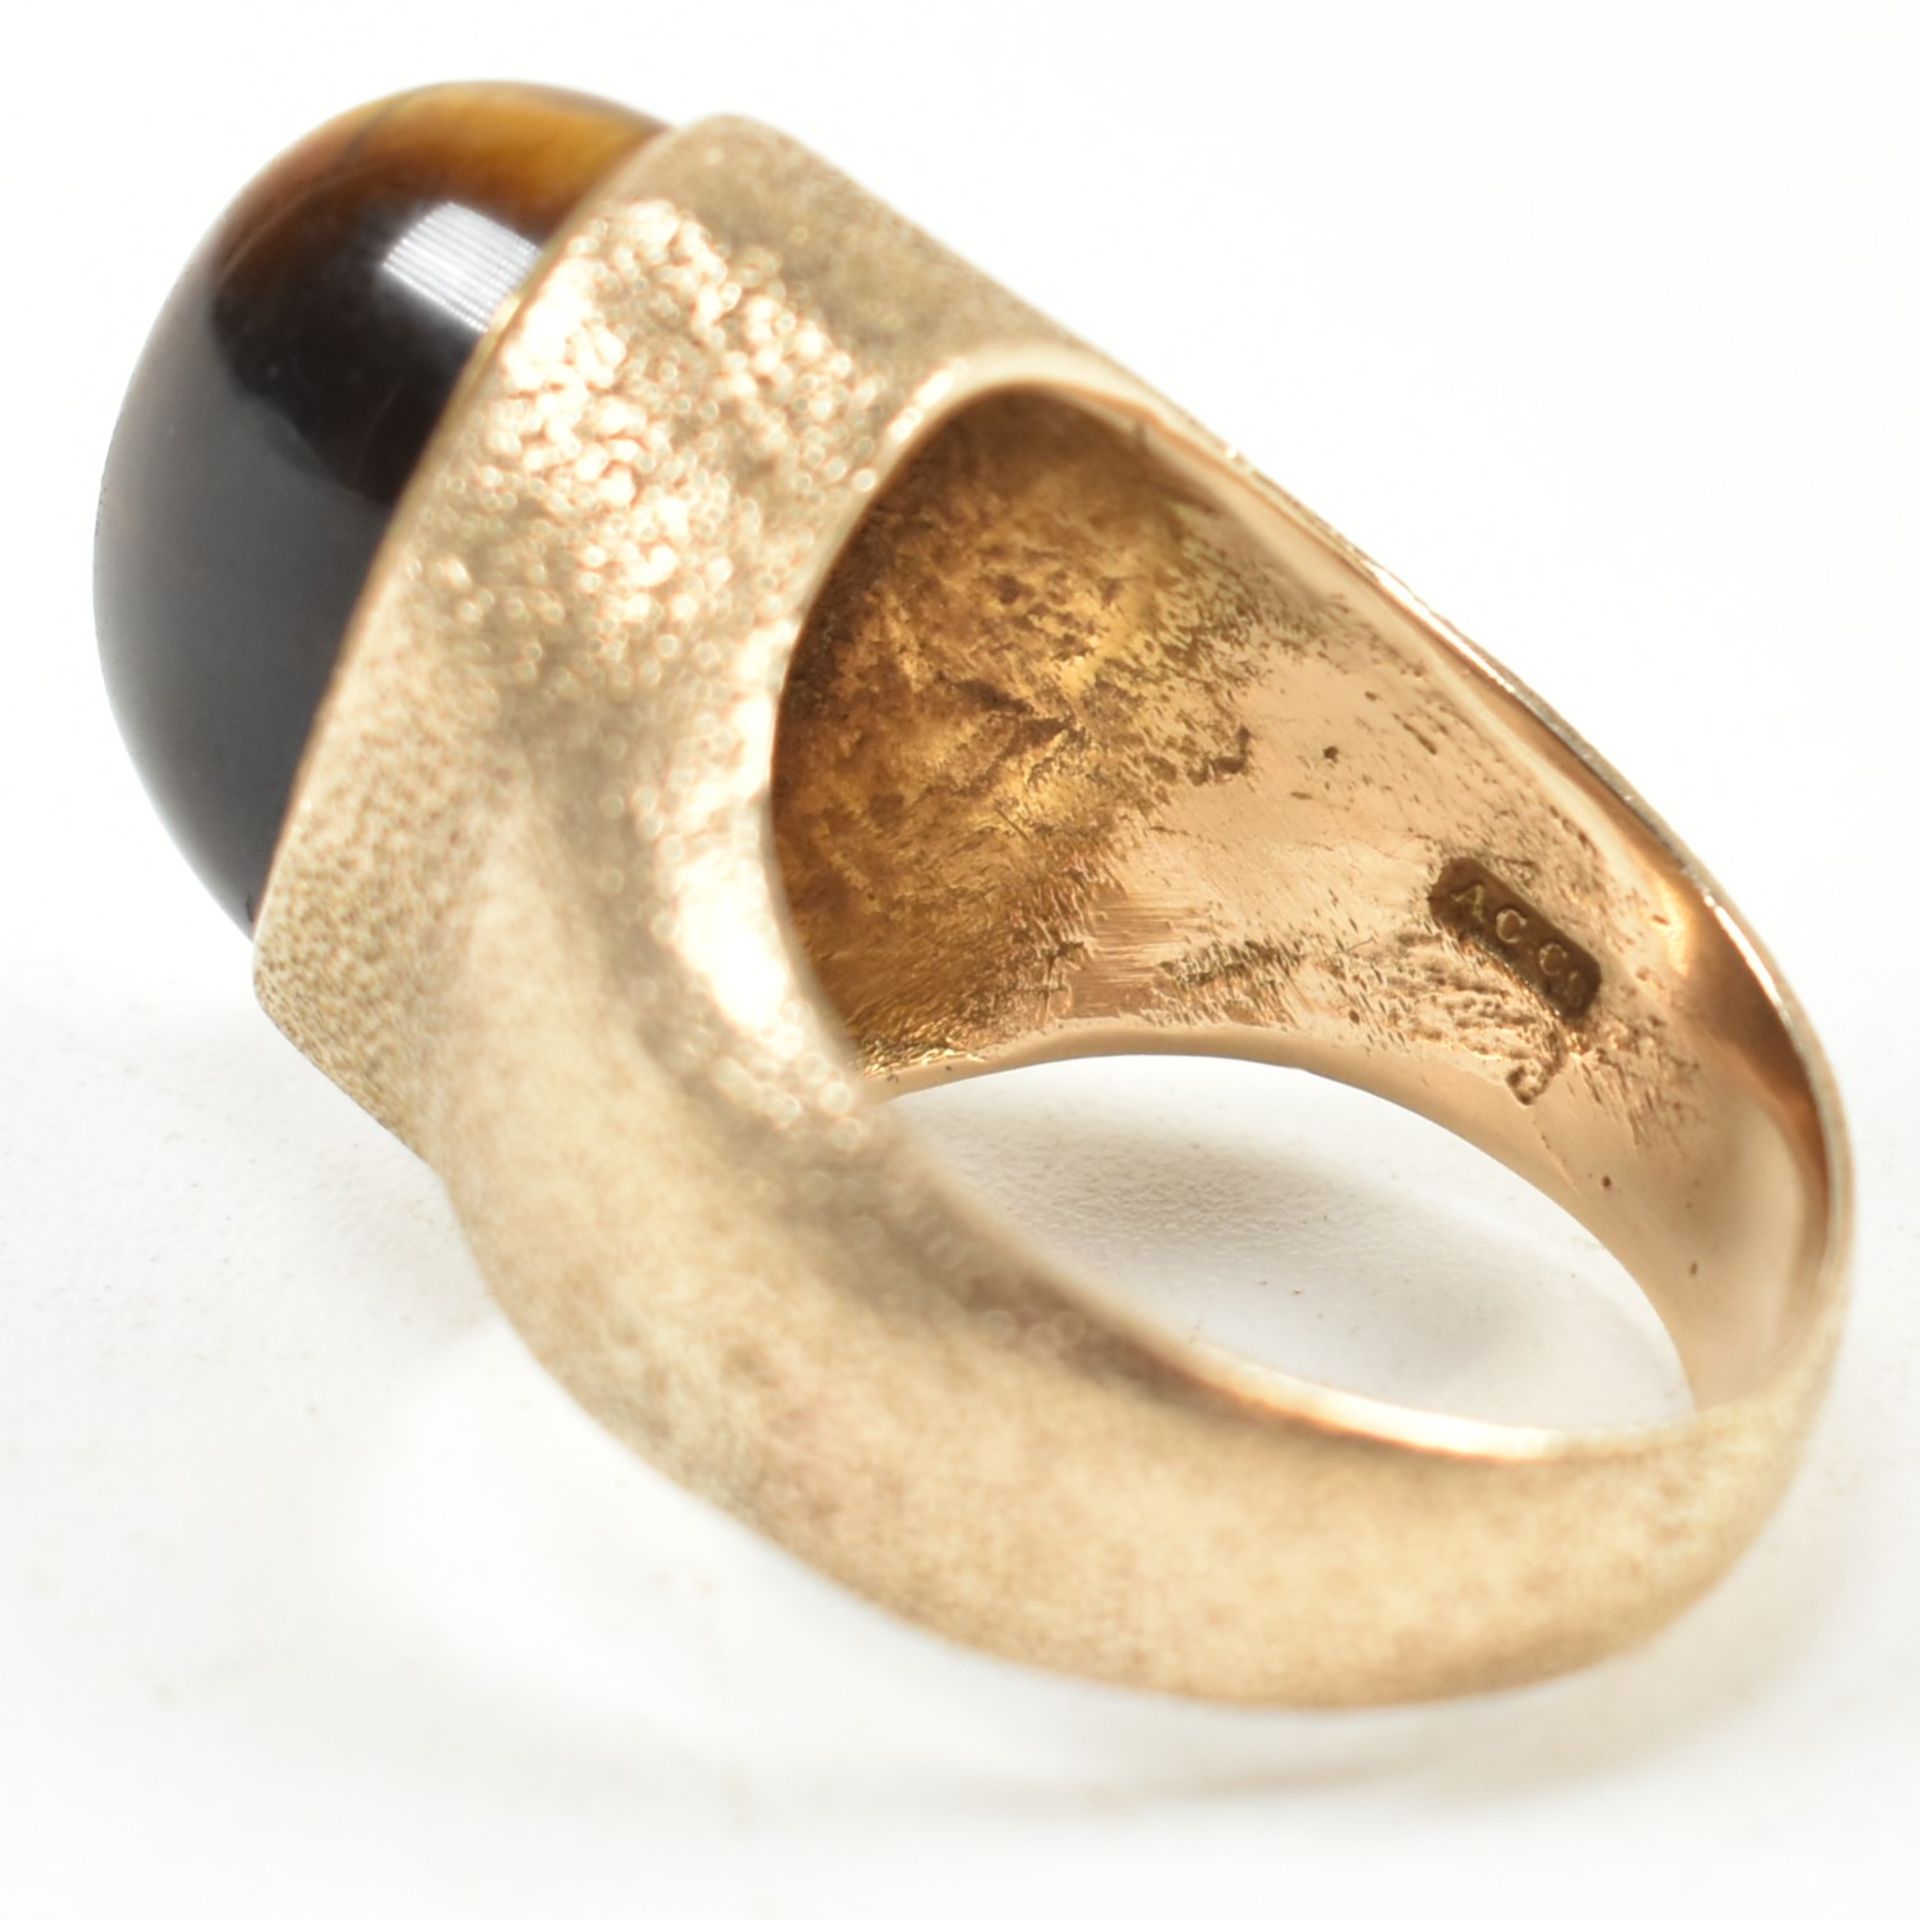 MODERNIST HALLMARKED 9CT GOLD & TIGERS EYE RING - Image 7 of 8